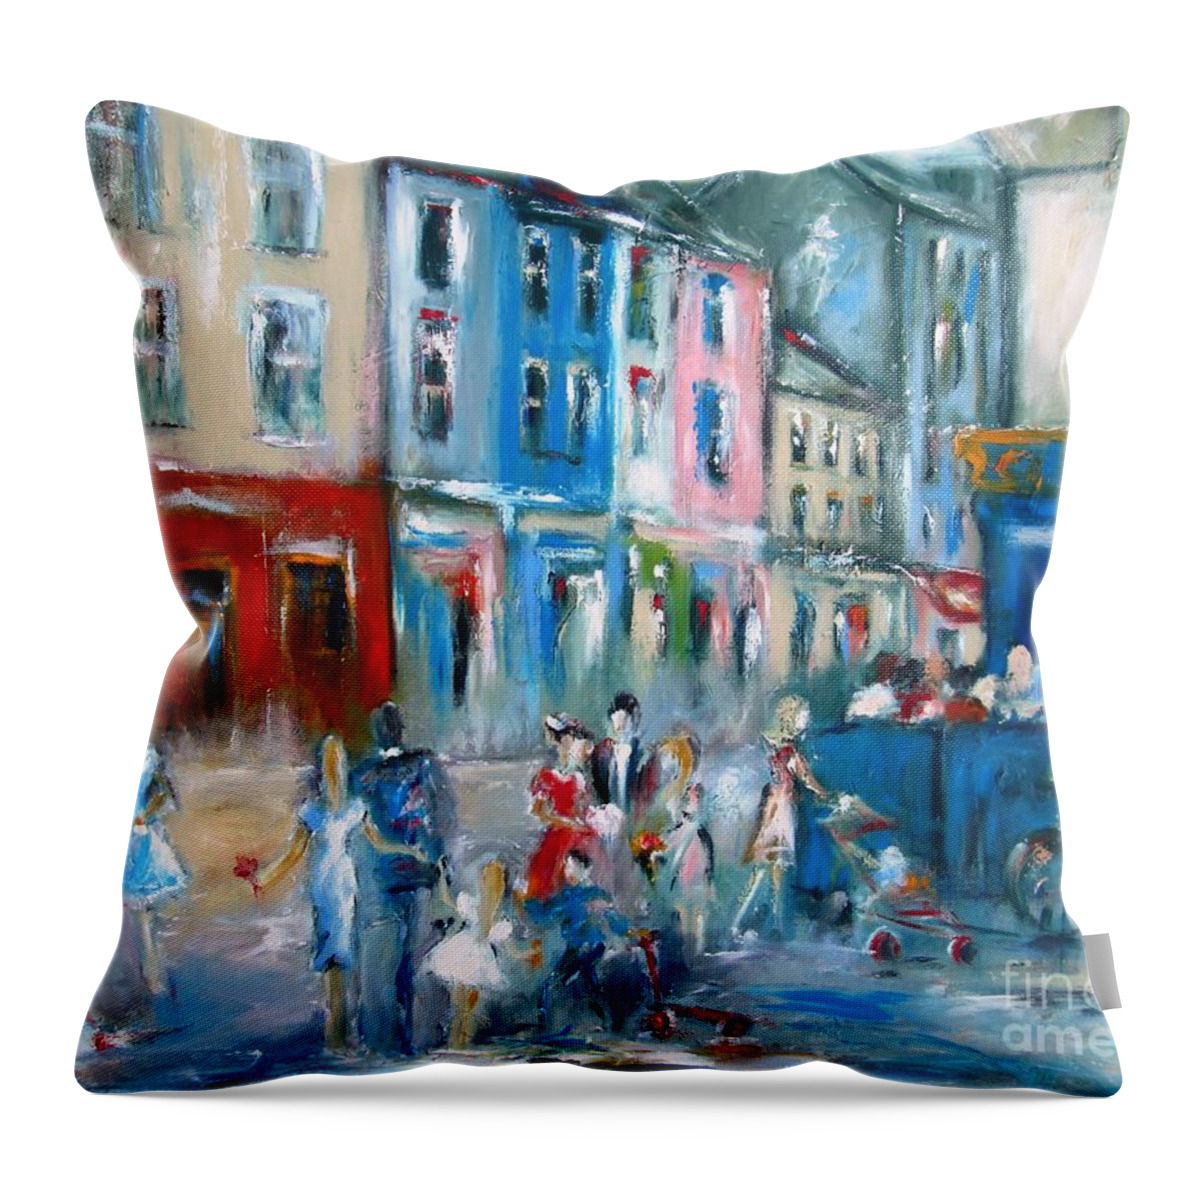 Galway Ireland. Quay Street Galway Ireland Throw Pillow featuring the painting Painting Of Quay Street Galway Ireland #1 by Mary Cahalan Lee - aka PIXI